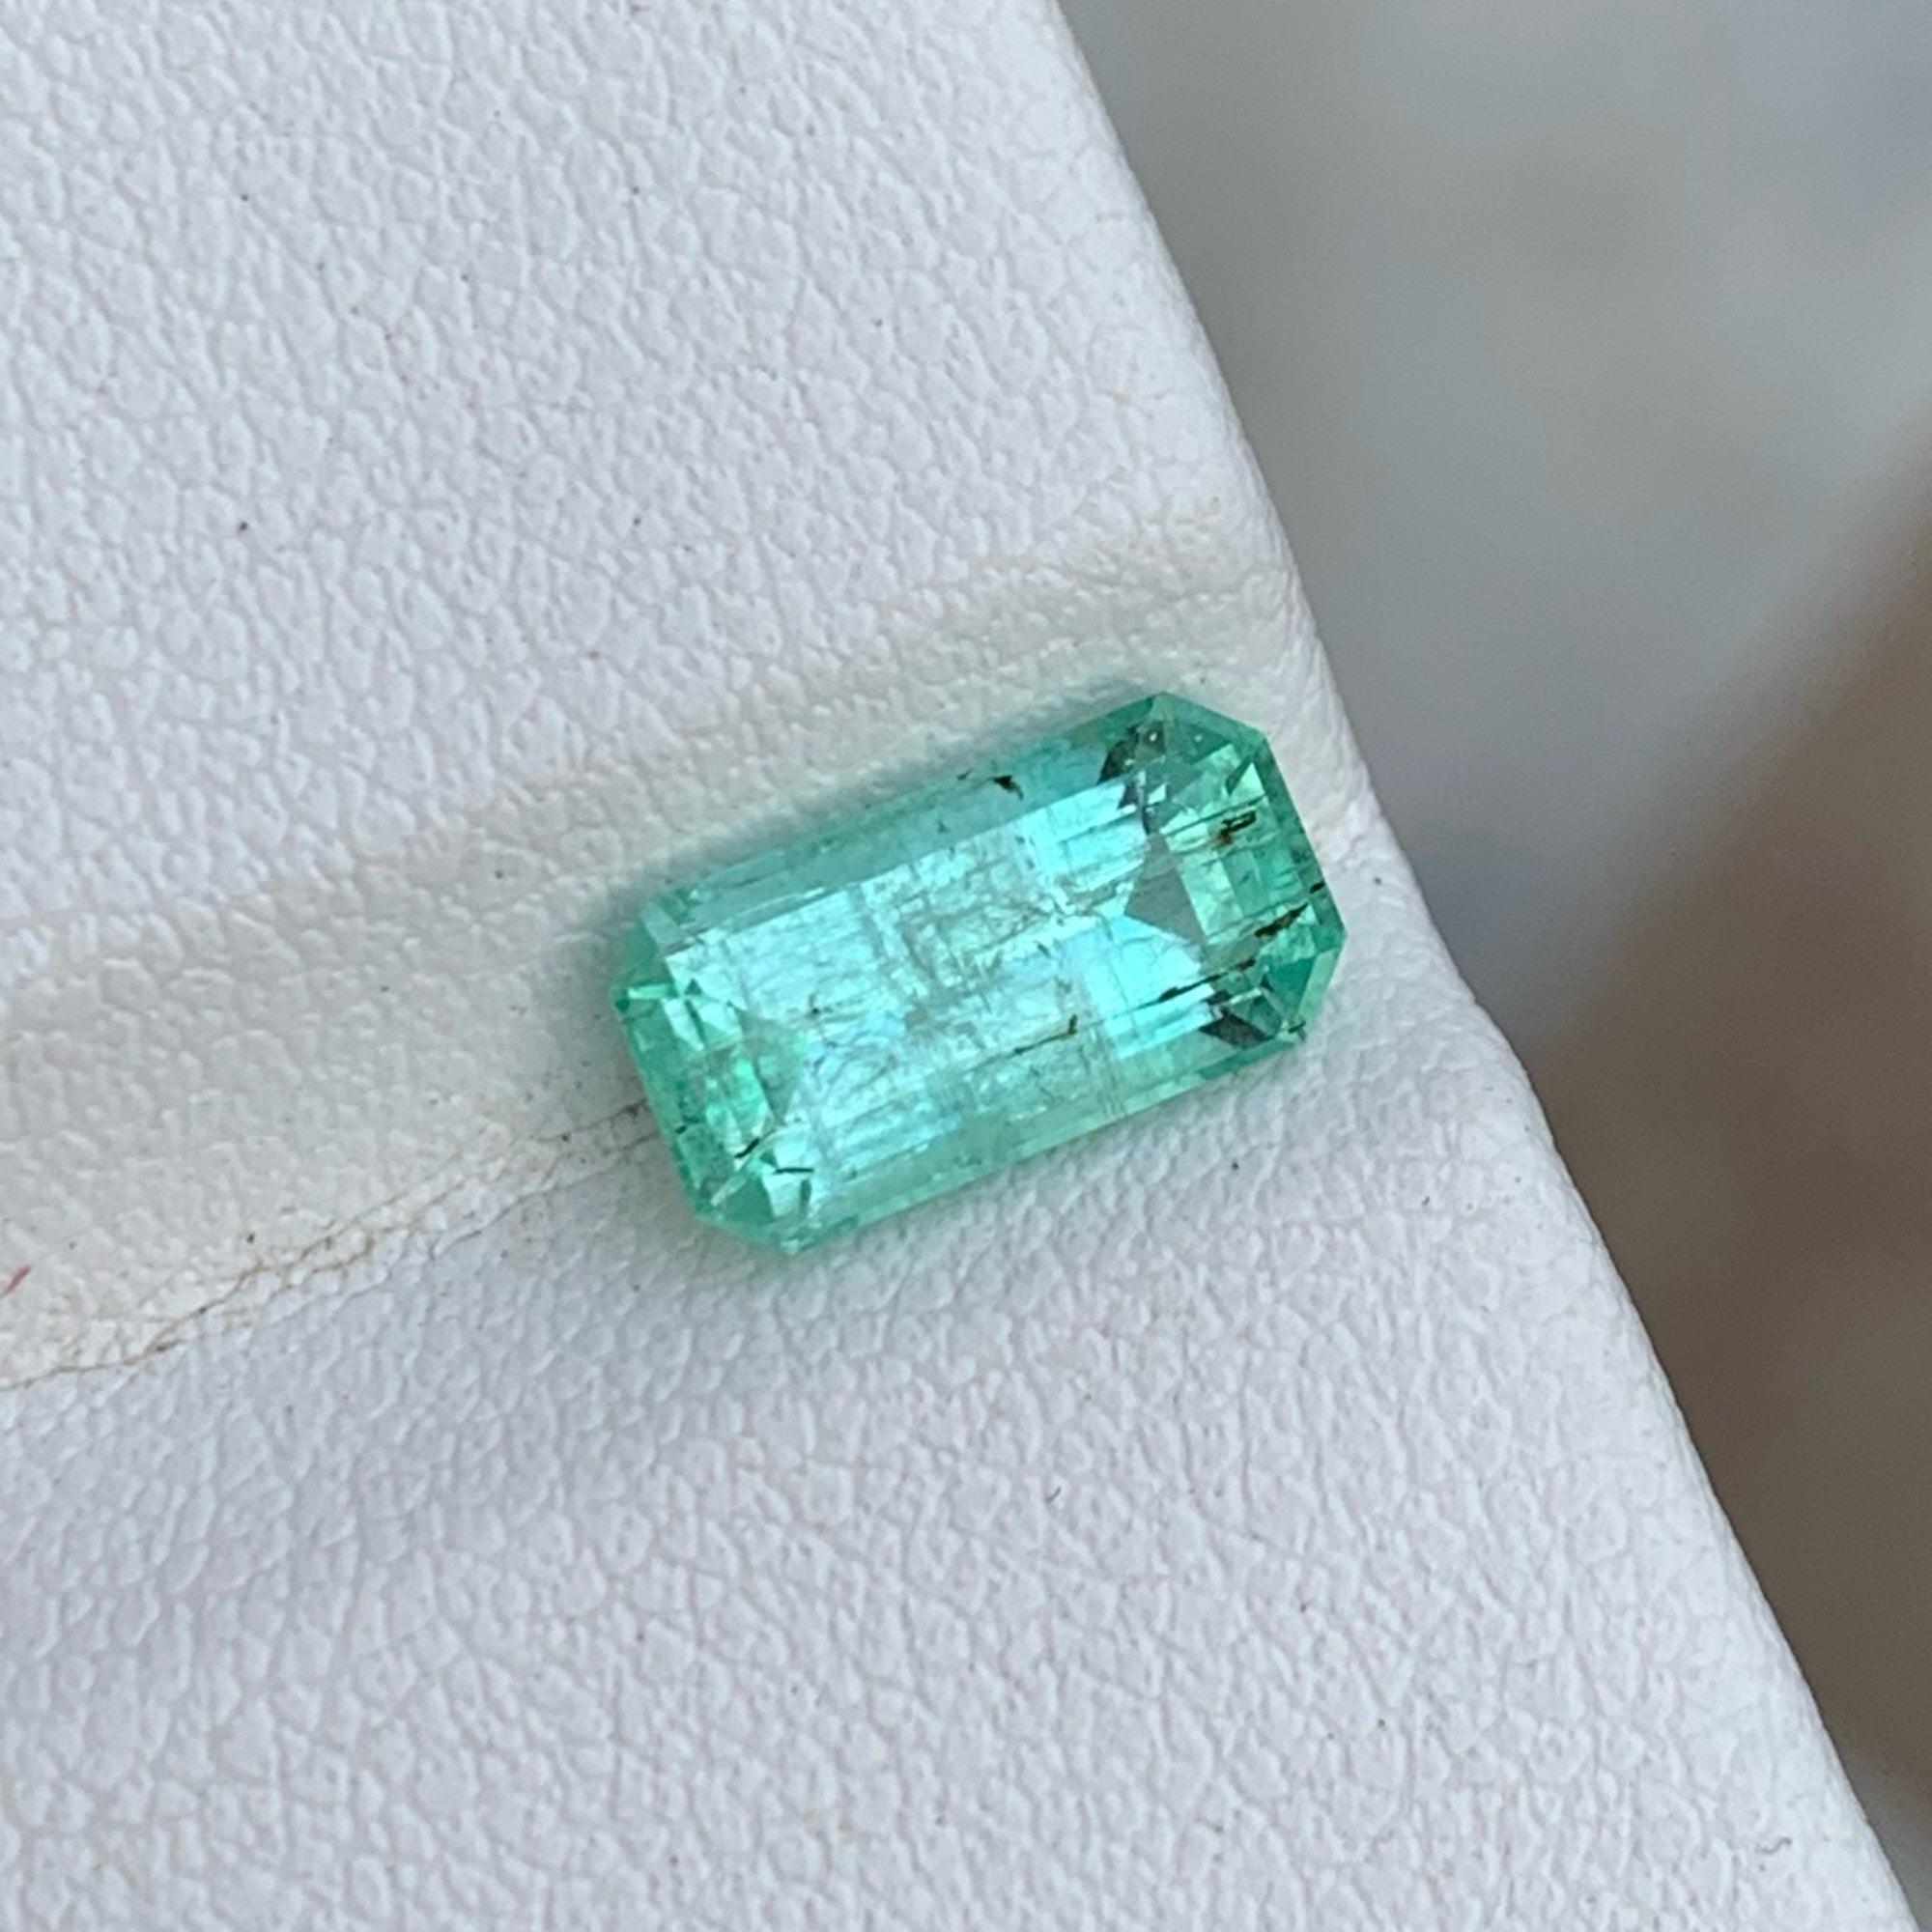 Emerald Cut Stunning Natural Emerald Stone 1.50 Carats Emerald Gemstone for Making Jewelry For Sale